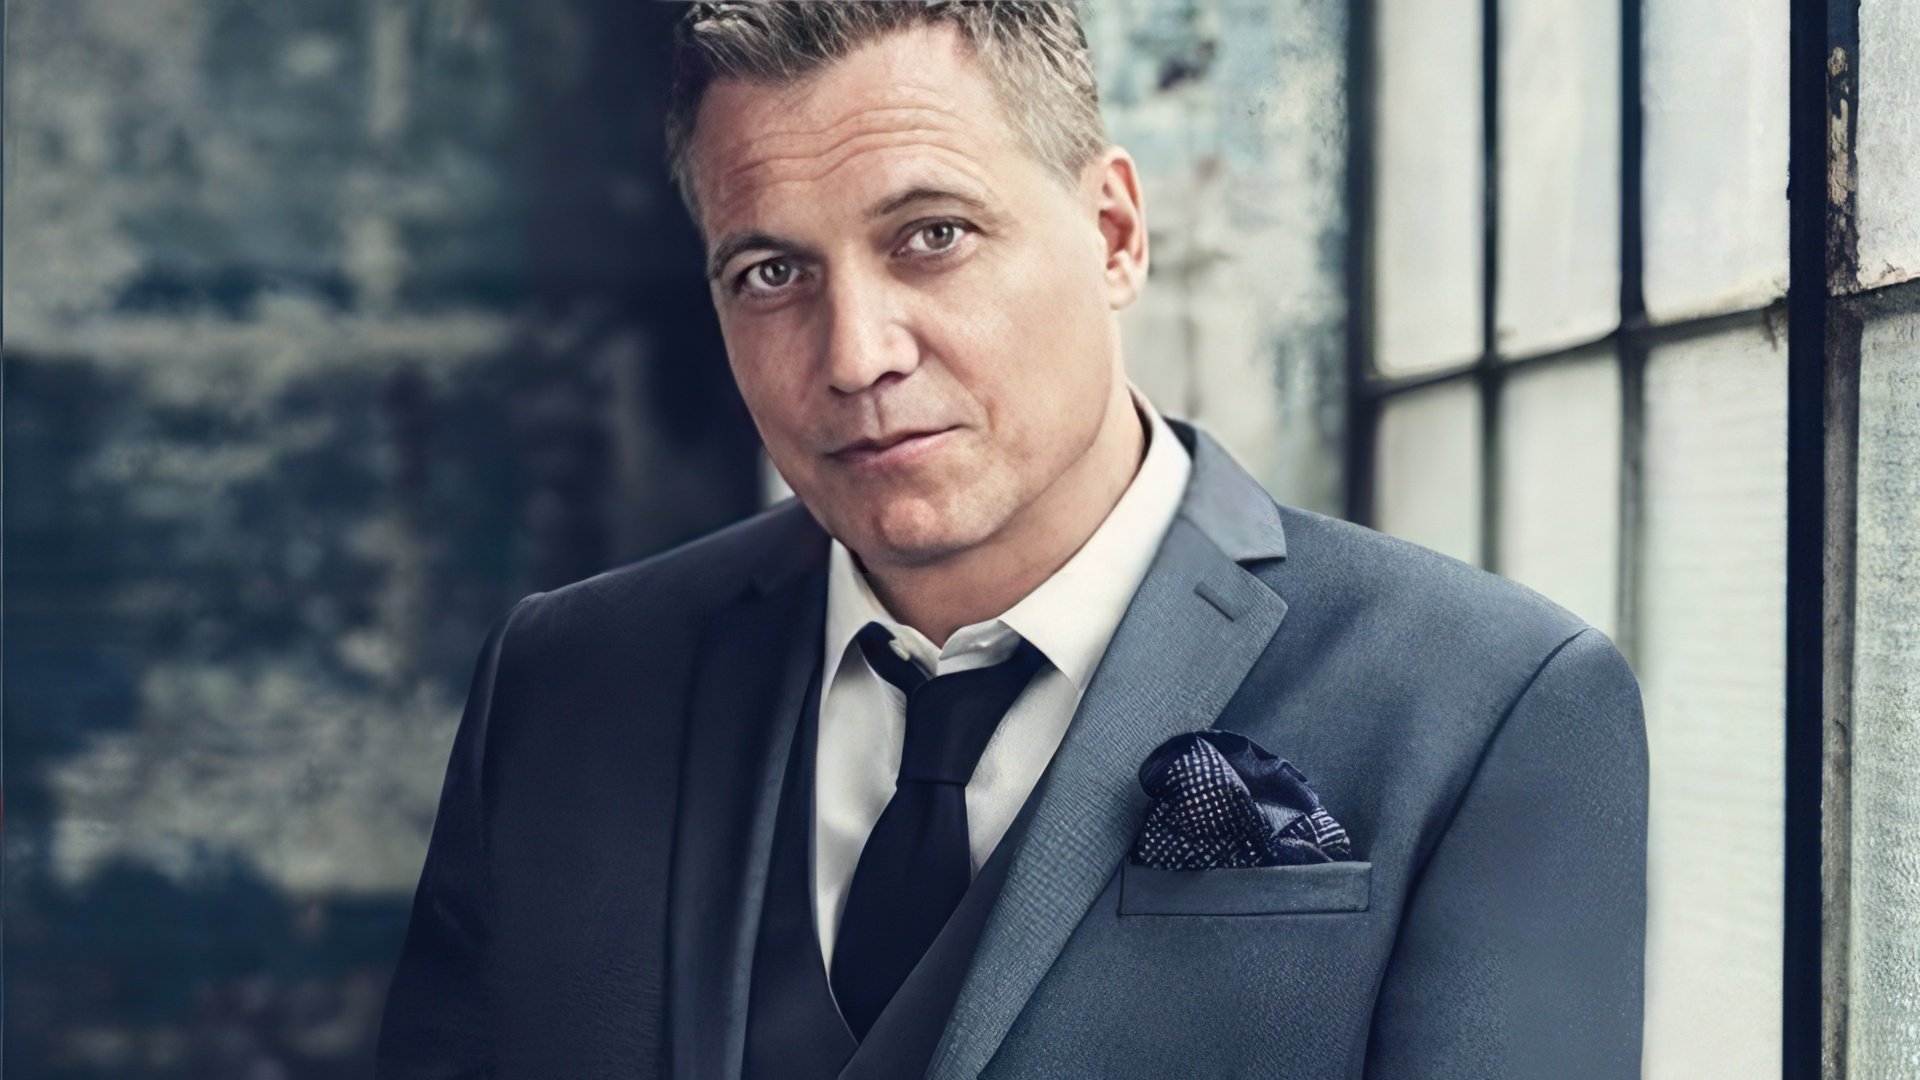 American actor Holt McCallany